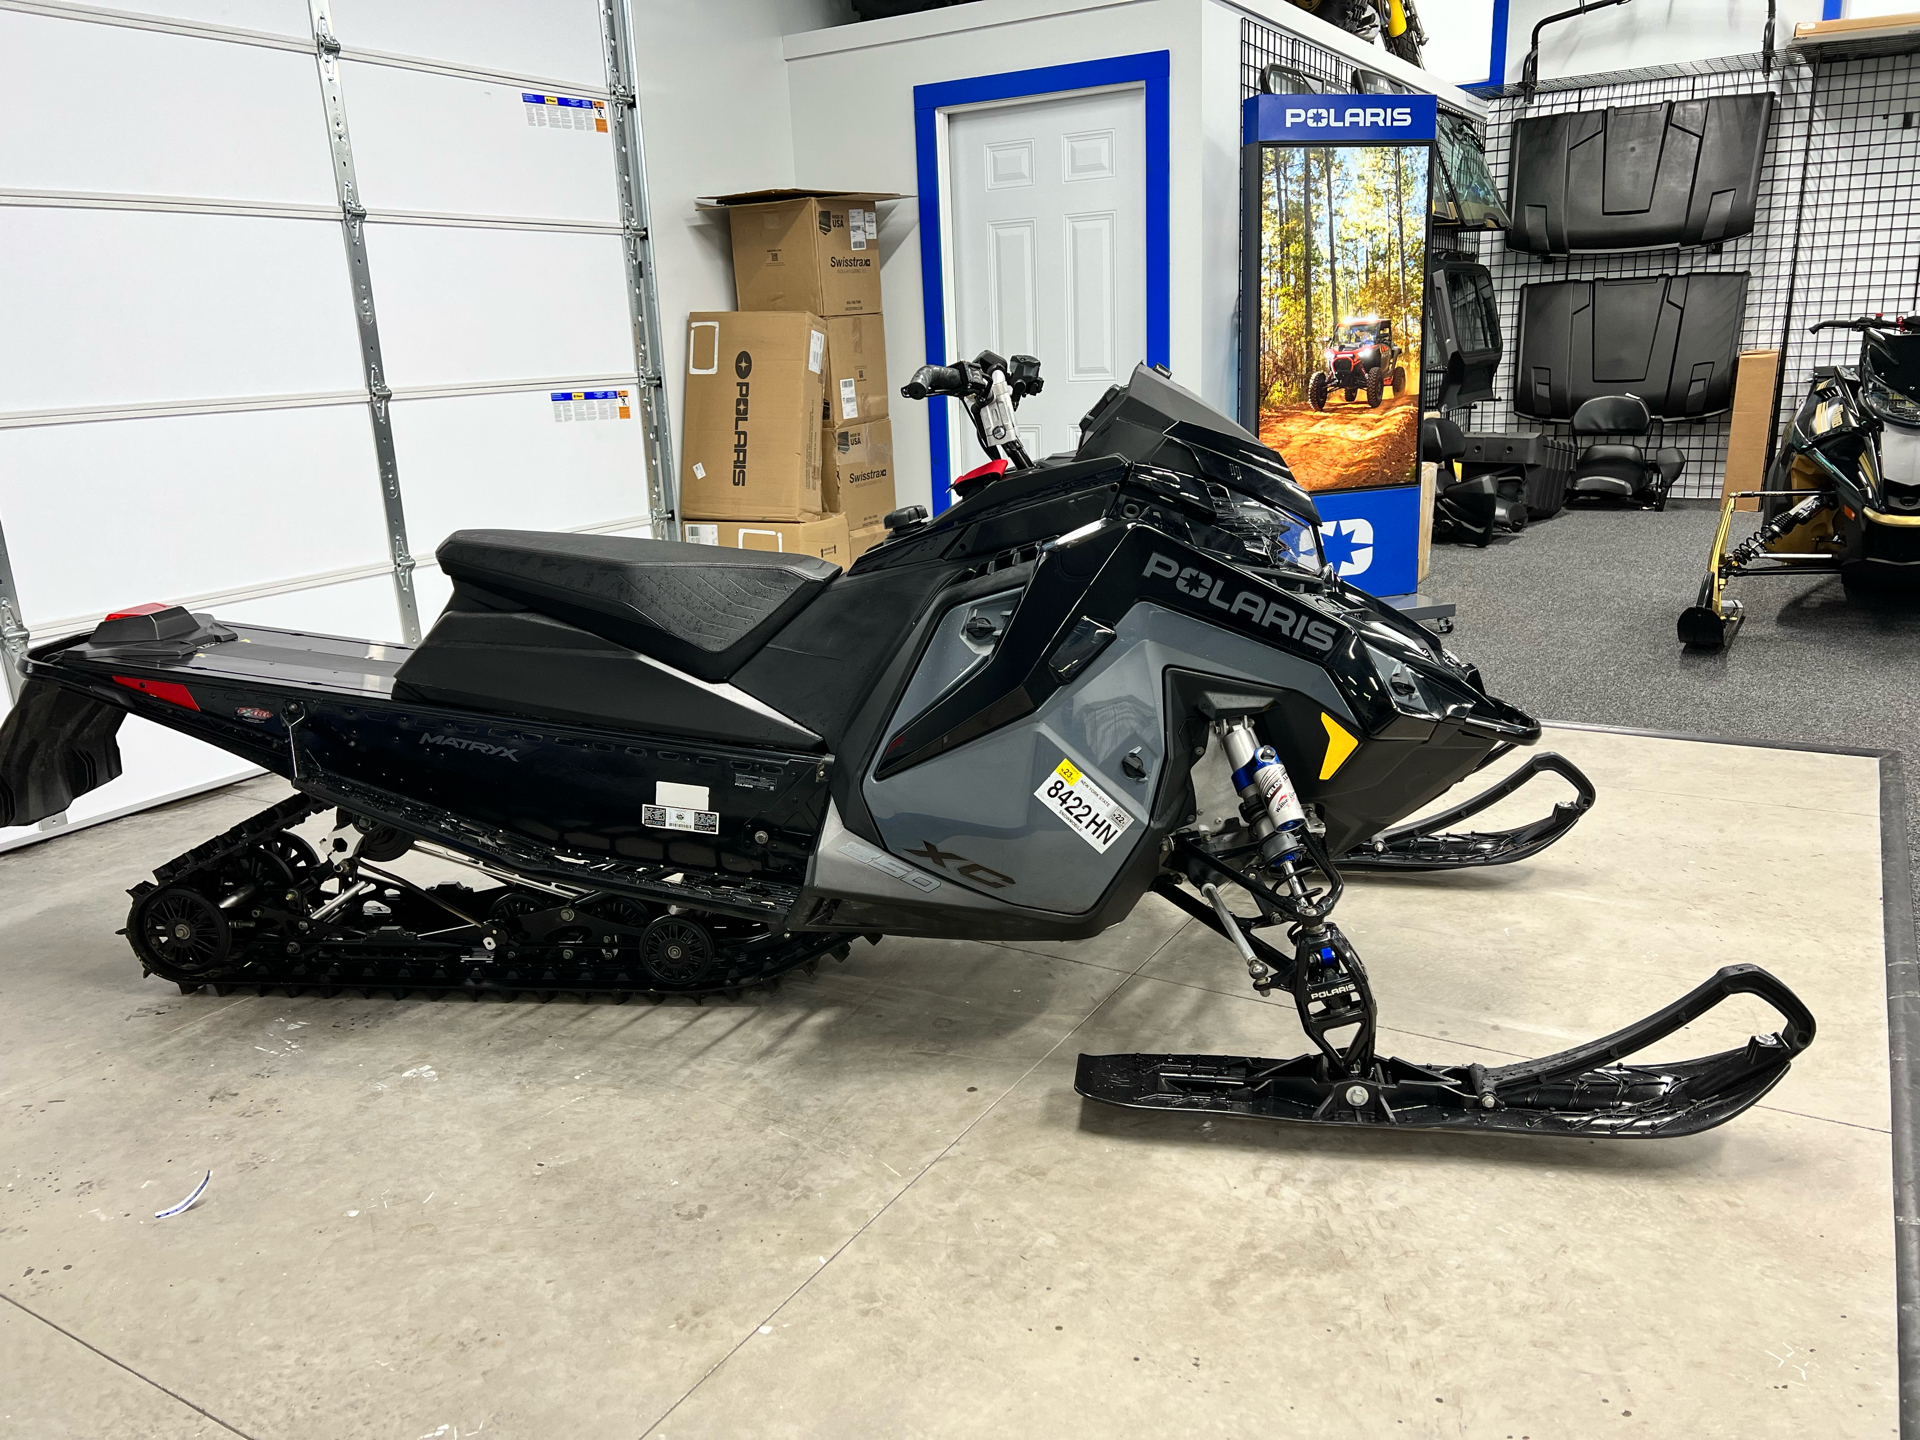 2021 Polaris 850 Indy XC 137 Launch Edition Factory Choice in Hubbardsville, New York - Photo 4